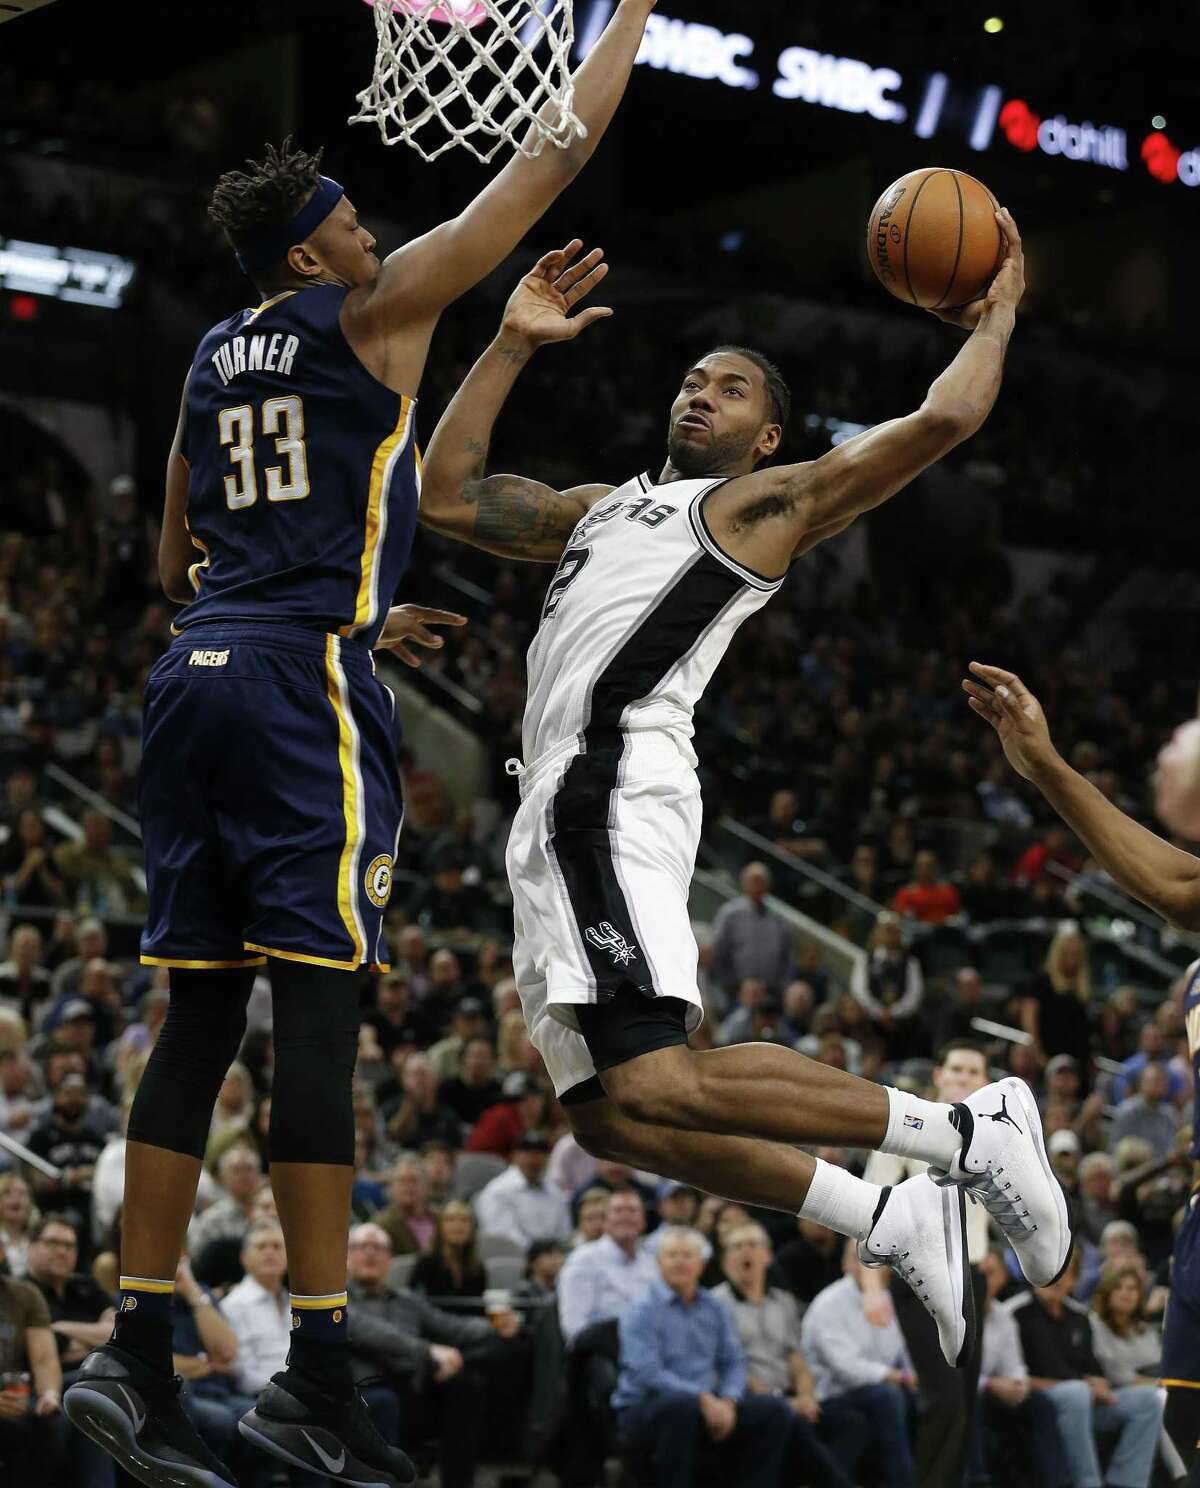 Spurs?’ Kawhi Leonard (02) gets fouled before attempting a shot by Indiana Pacers?’ Myles Turner (33) during their game at the AT&T Center on Wednesday, Mar. 1, 2017. Spurs defeated the Pacers, 100-99. (Kin Man Hui/San Antonio Express-News)